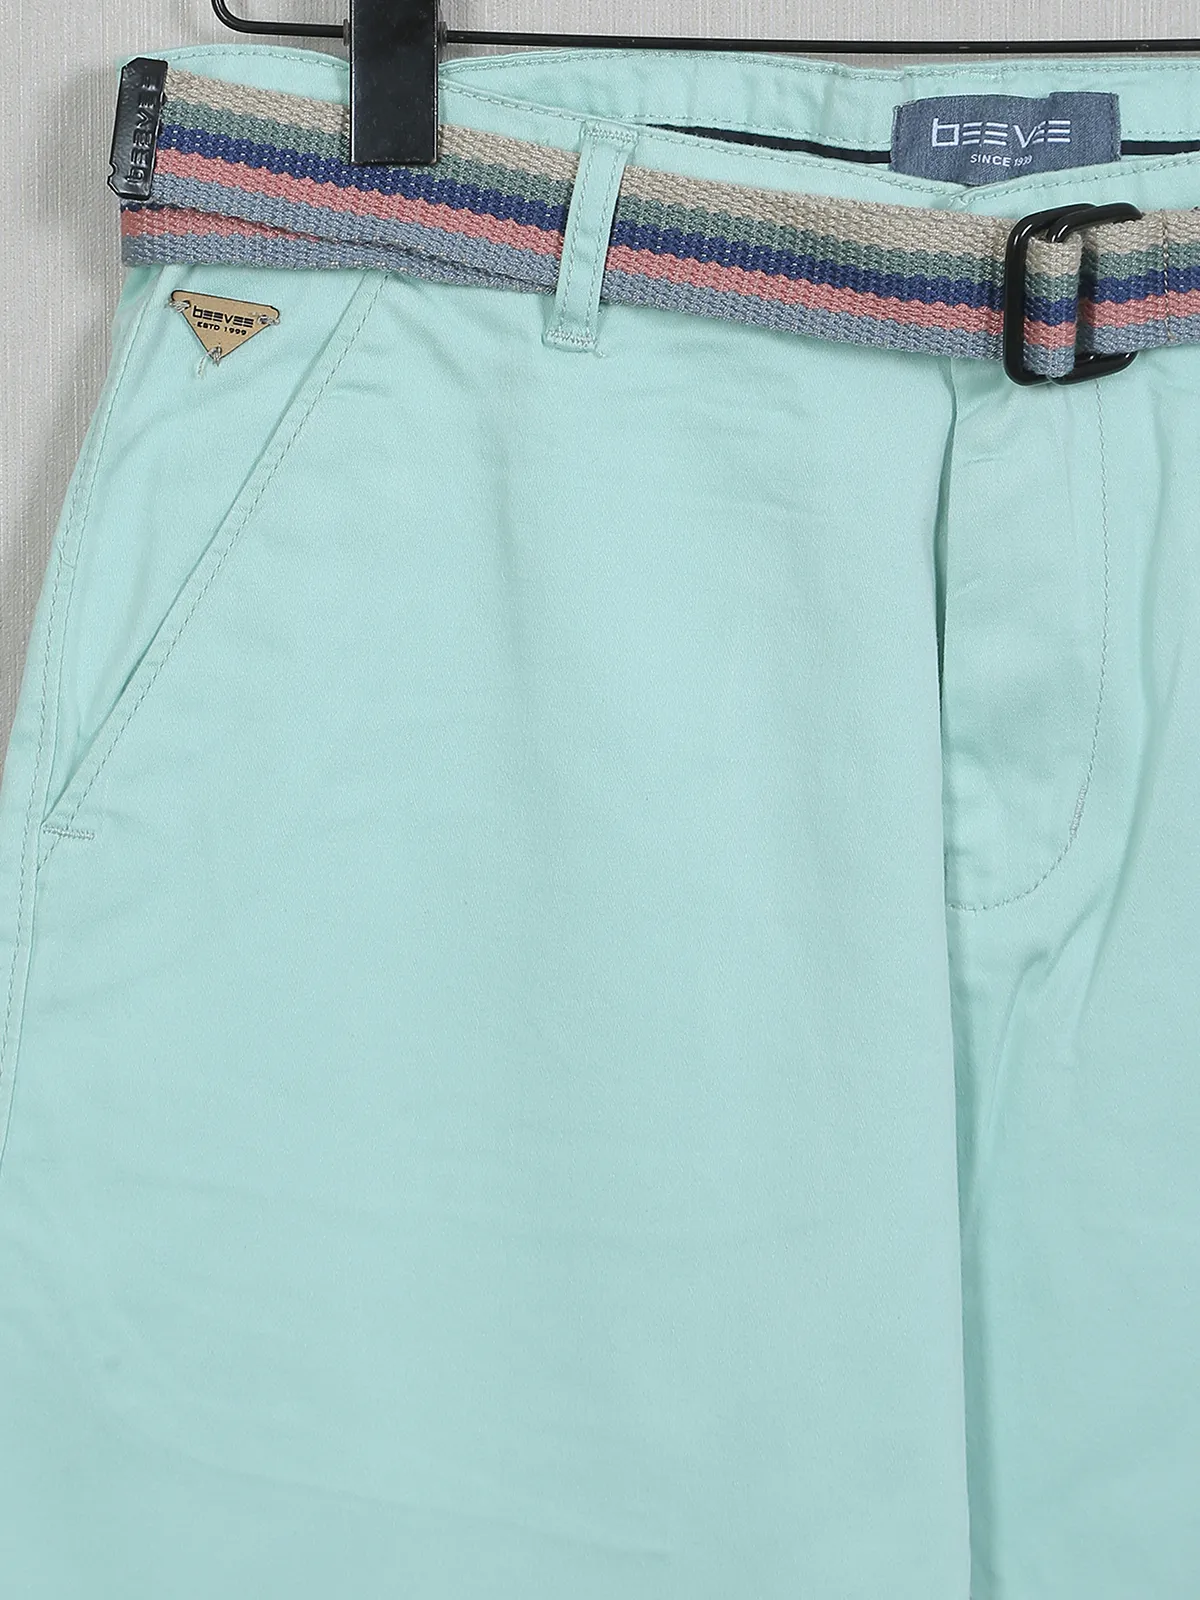 Bee Vee mint casual cotton shorts